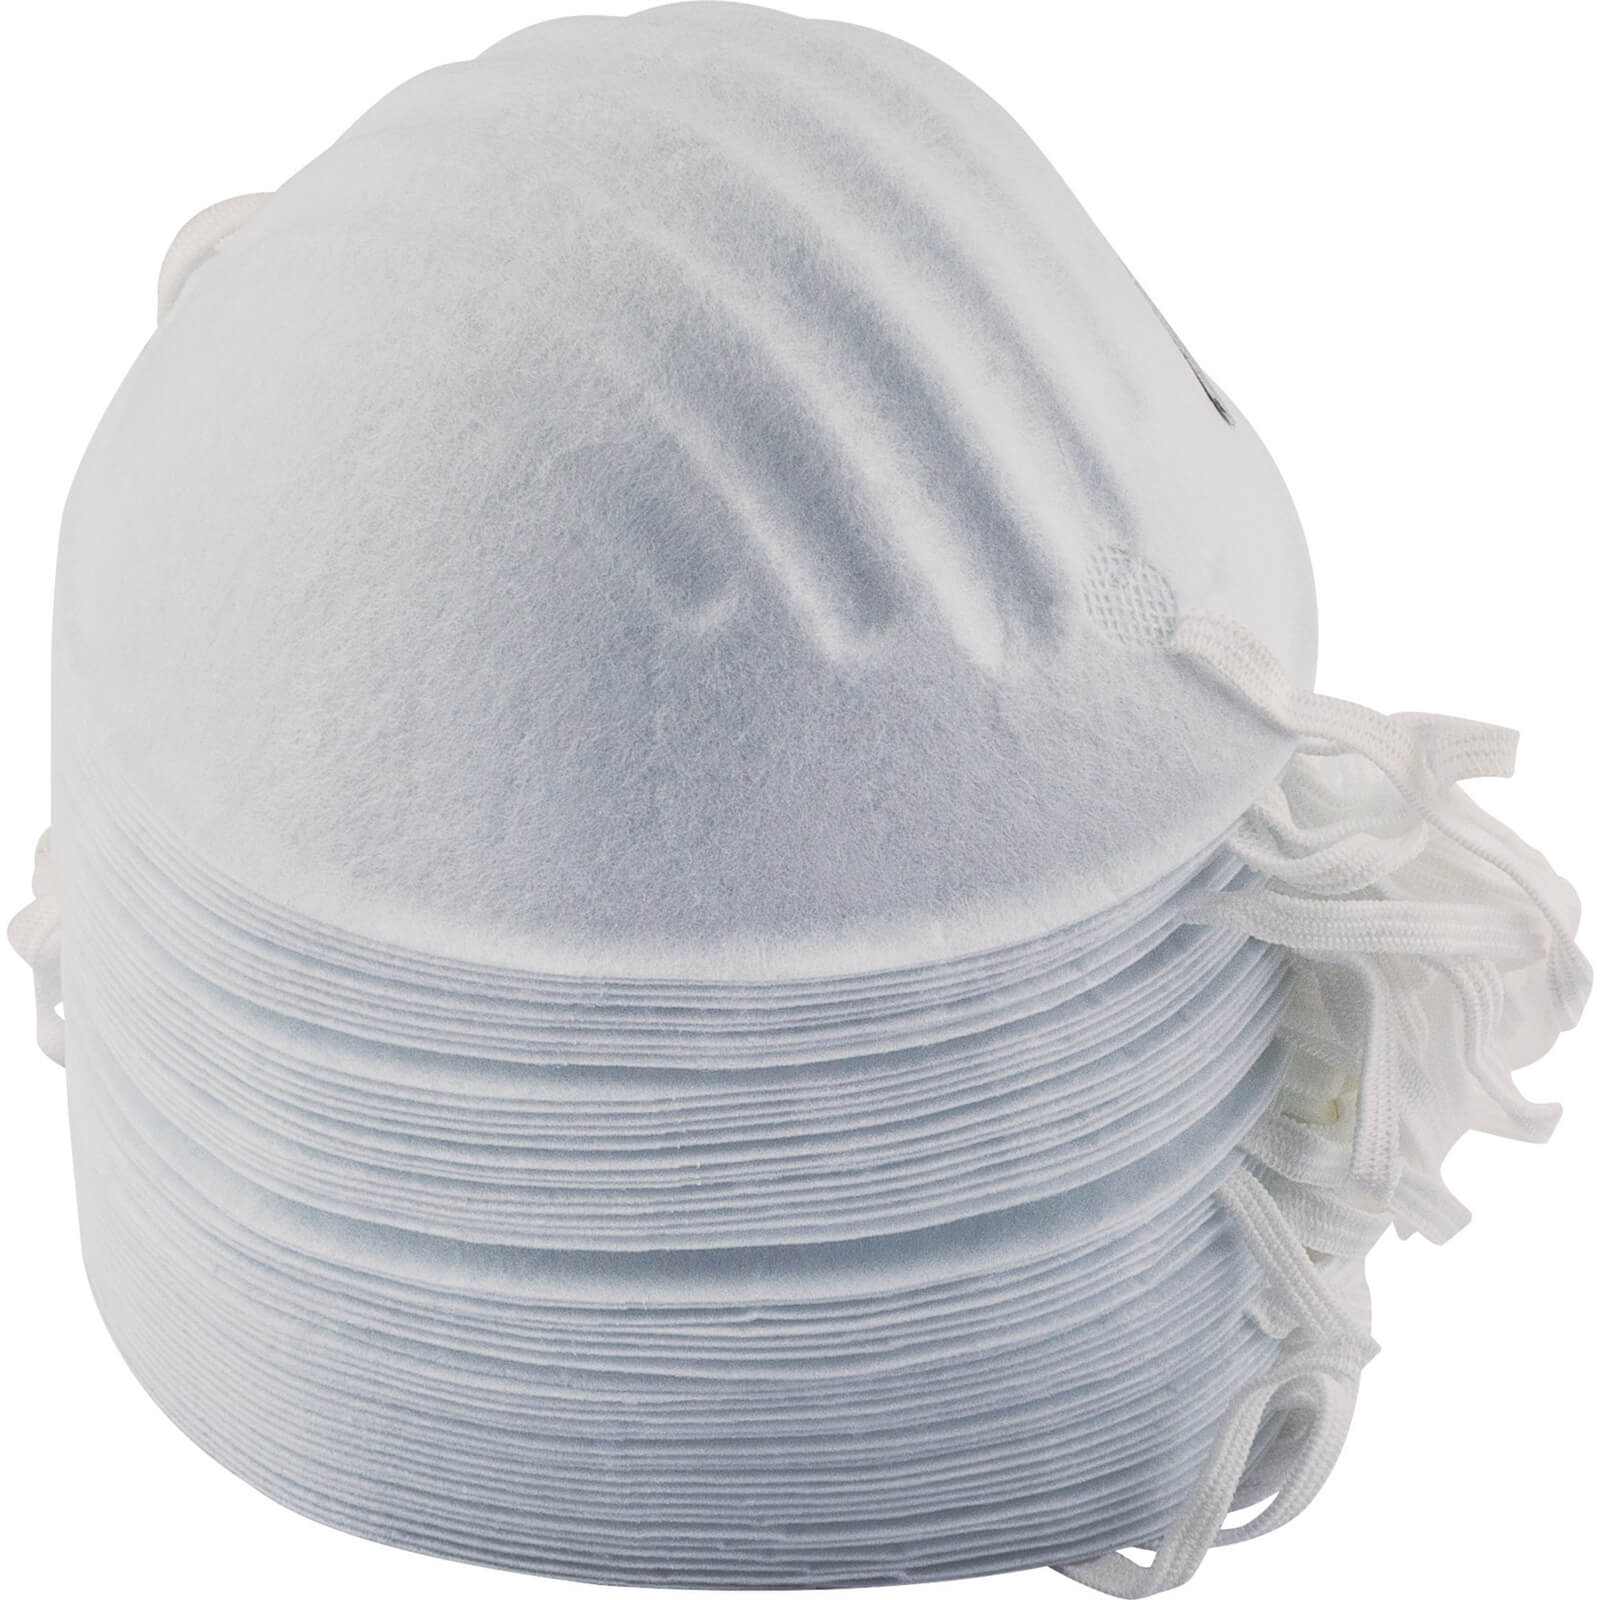 Image of Draper Disposable Nuisance Dust Masks Pack of 50